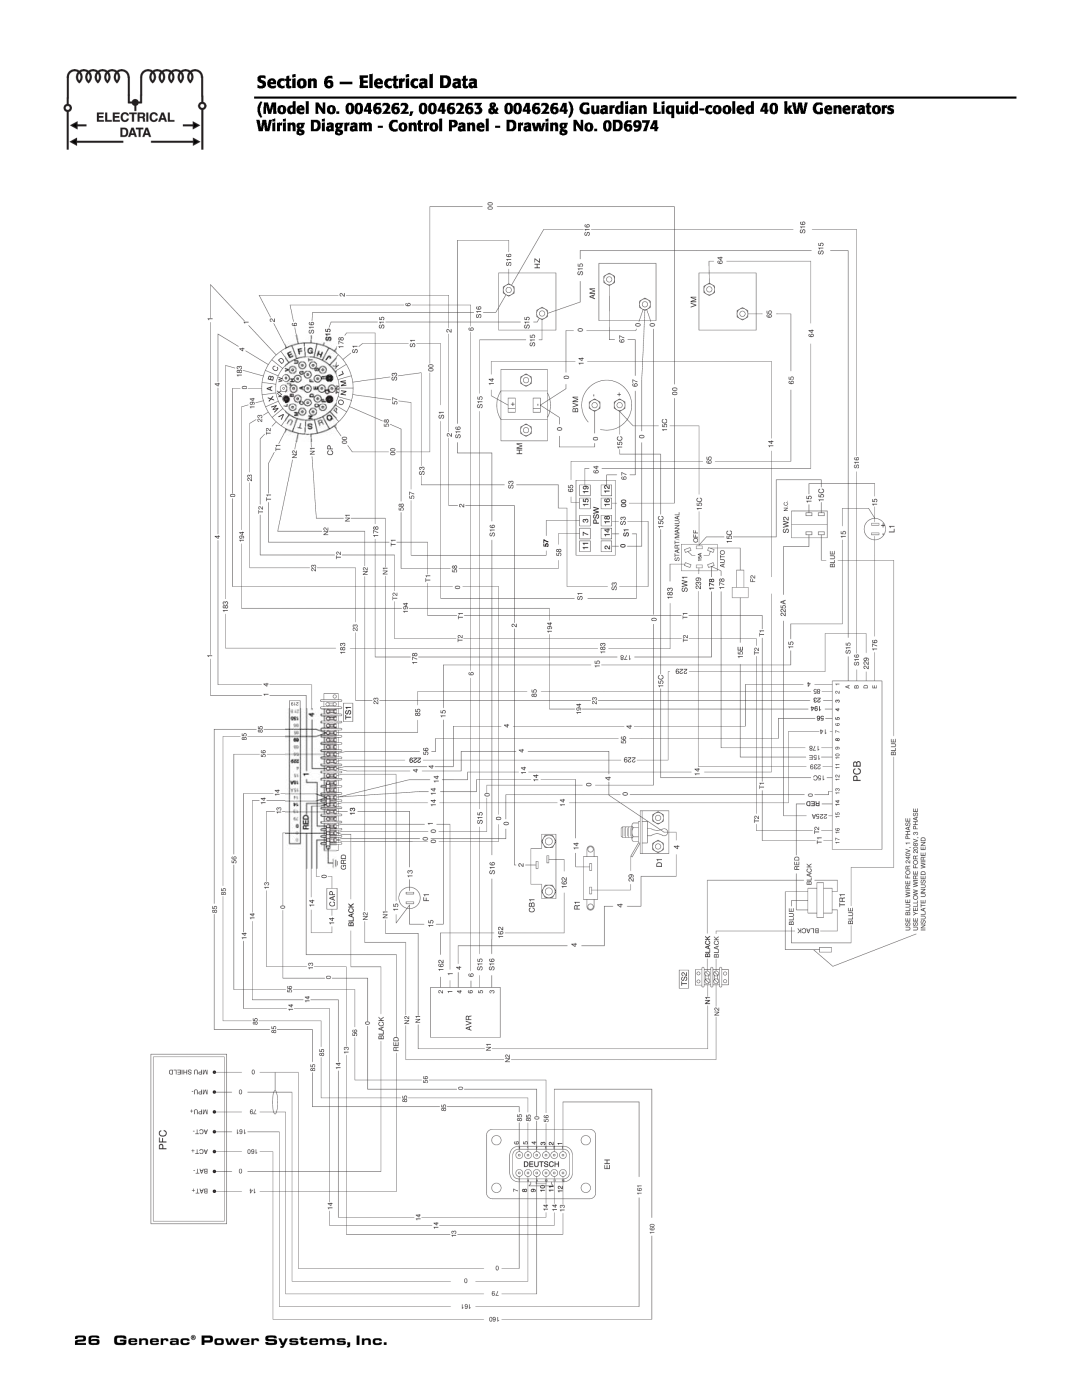 Generac Power Systems 0043734 Electrical Data, Wiring Diagram - Control Panel, Model No. 0046262, 0046264, DrawingNo 